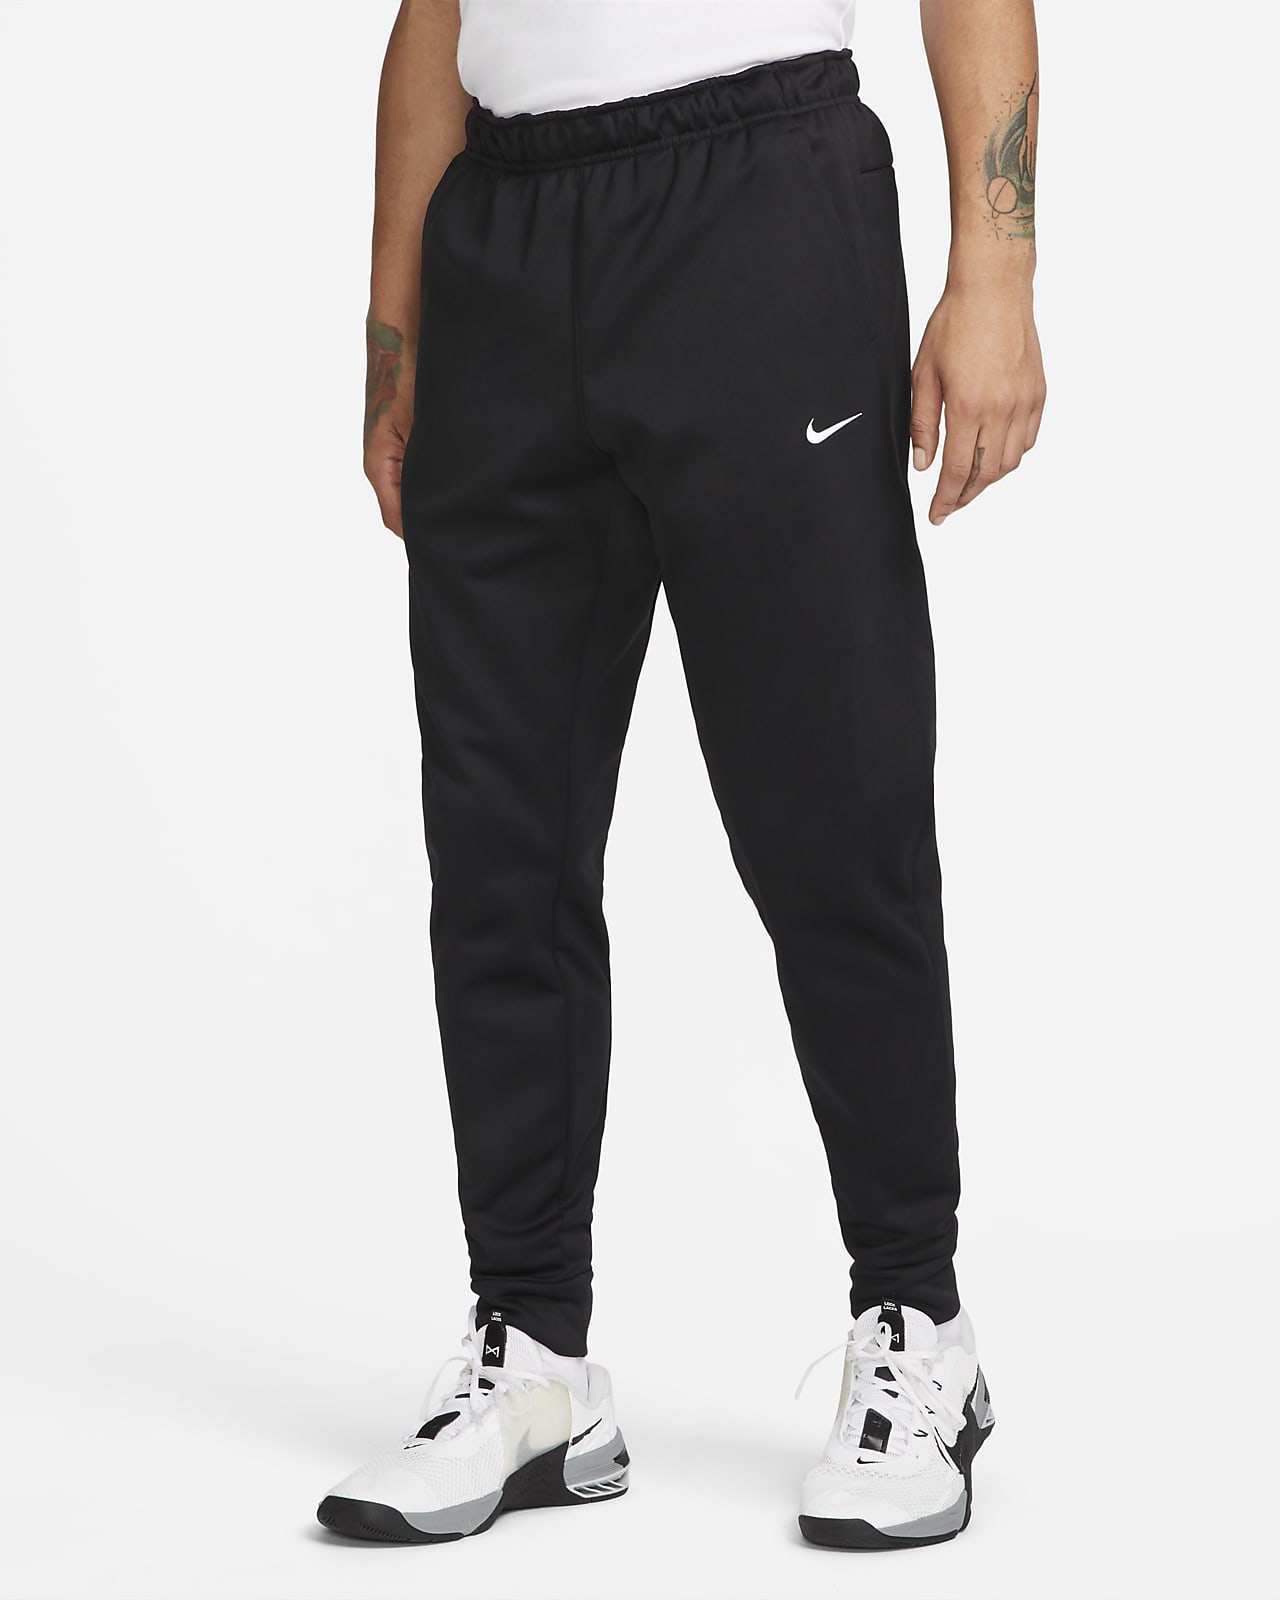 Predecesor Confuso digerir Nike Therma Men's Therma-FIT Tapered Fitness Pants. Nike.com